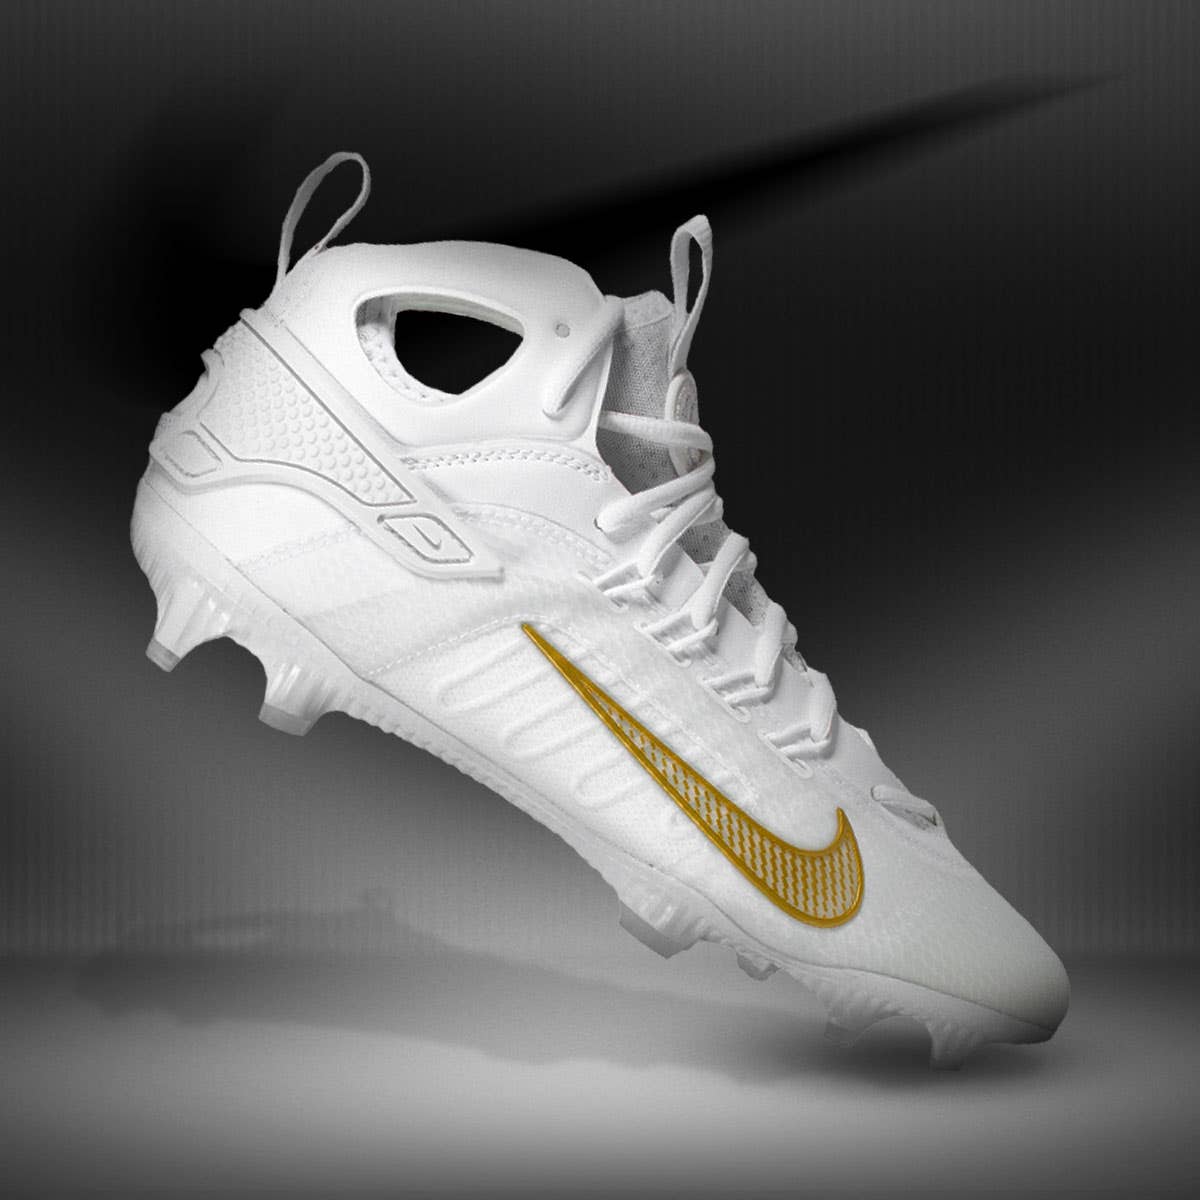 Nike Huarache 9 Elite Mid Lacrosse Cleat white and gold